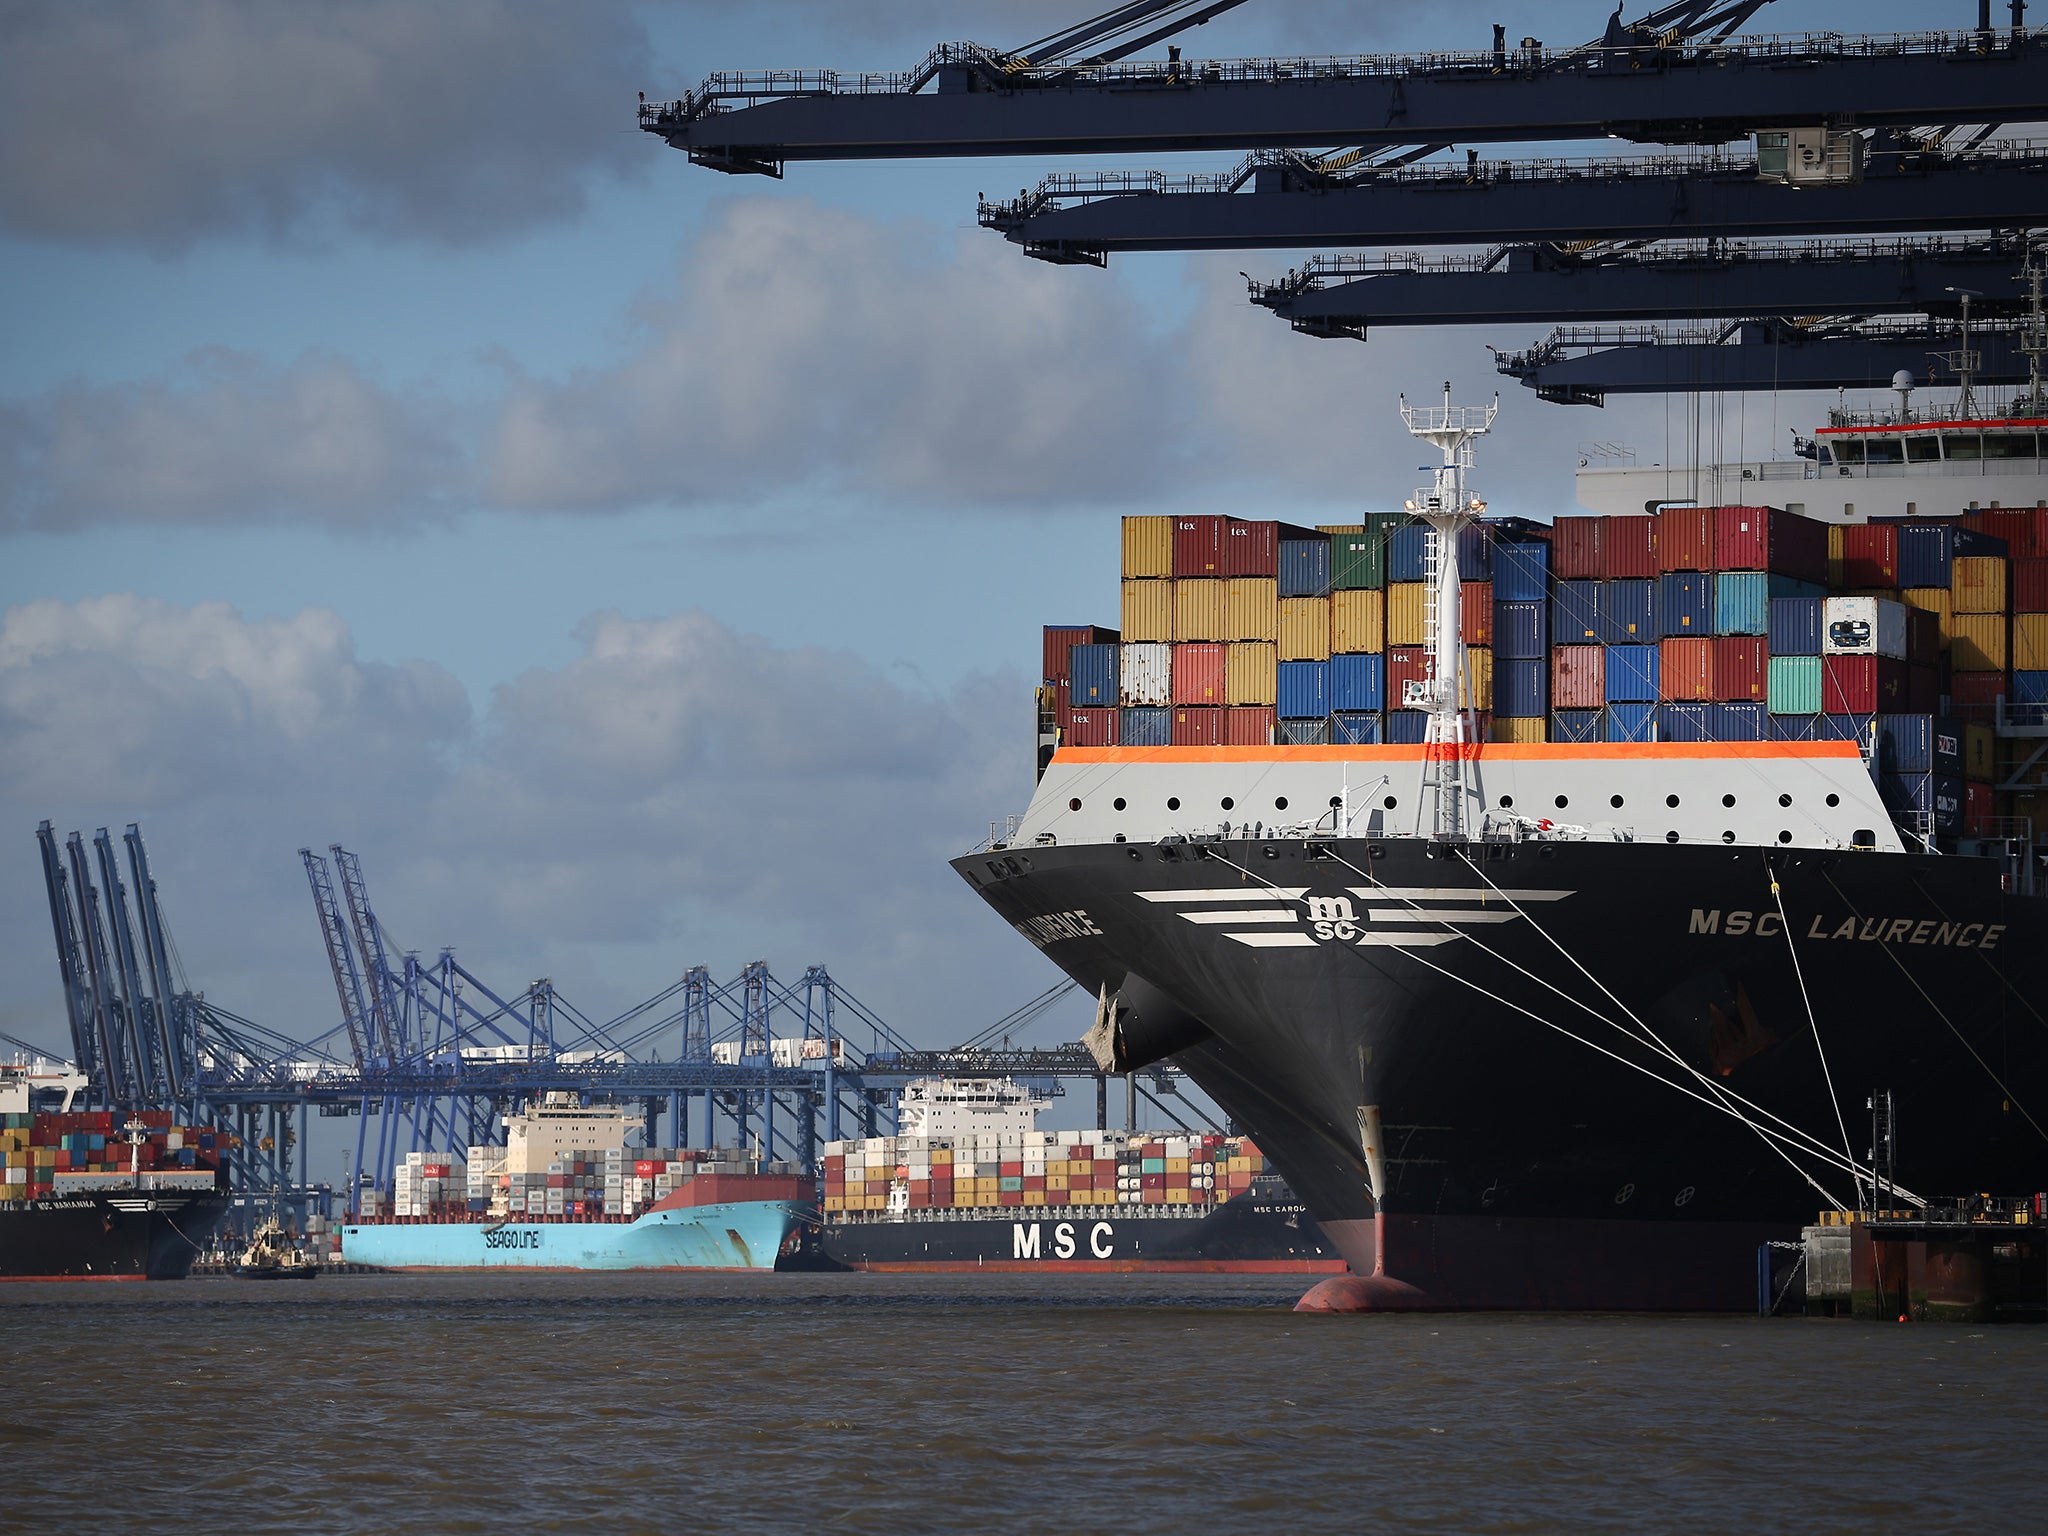 A majority of British exporters rely on sales to the EU bloc, according to one survey